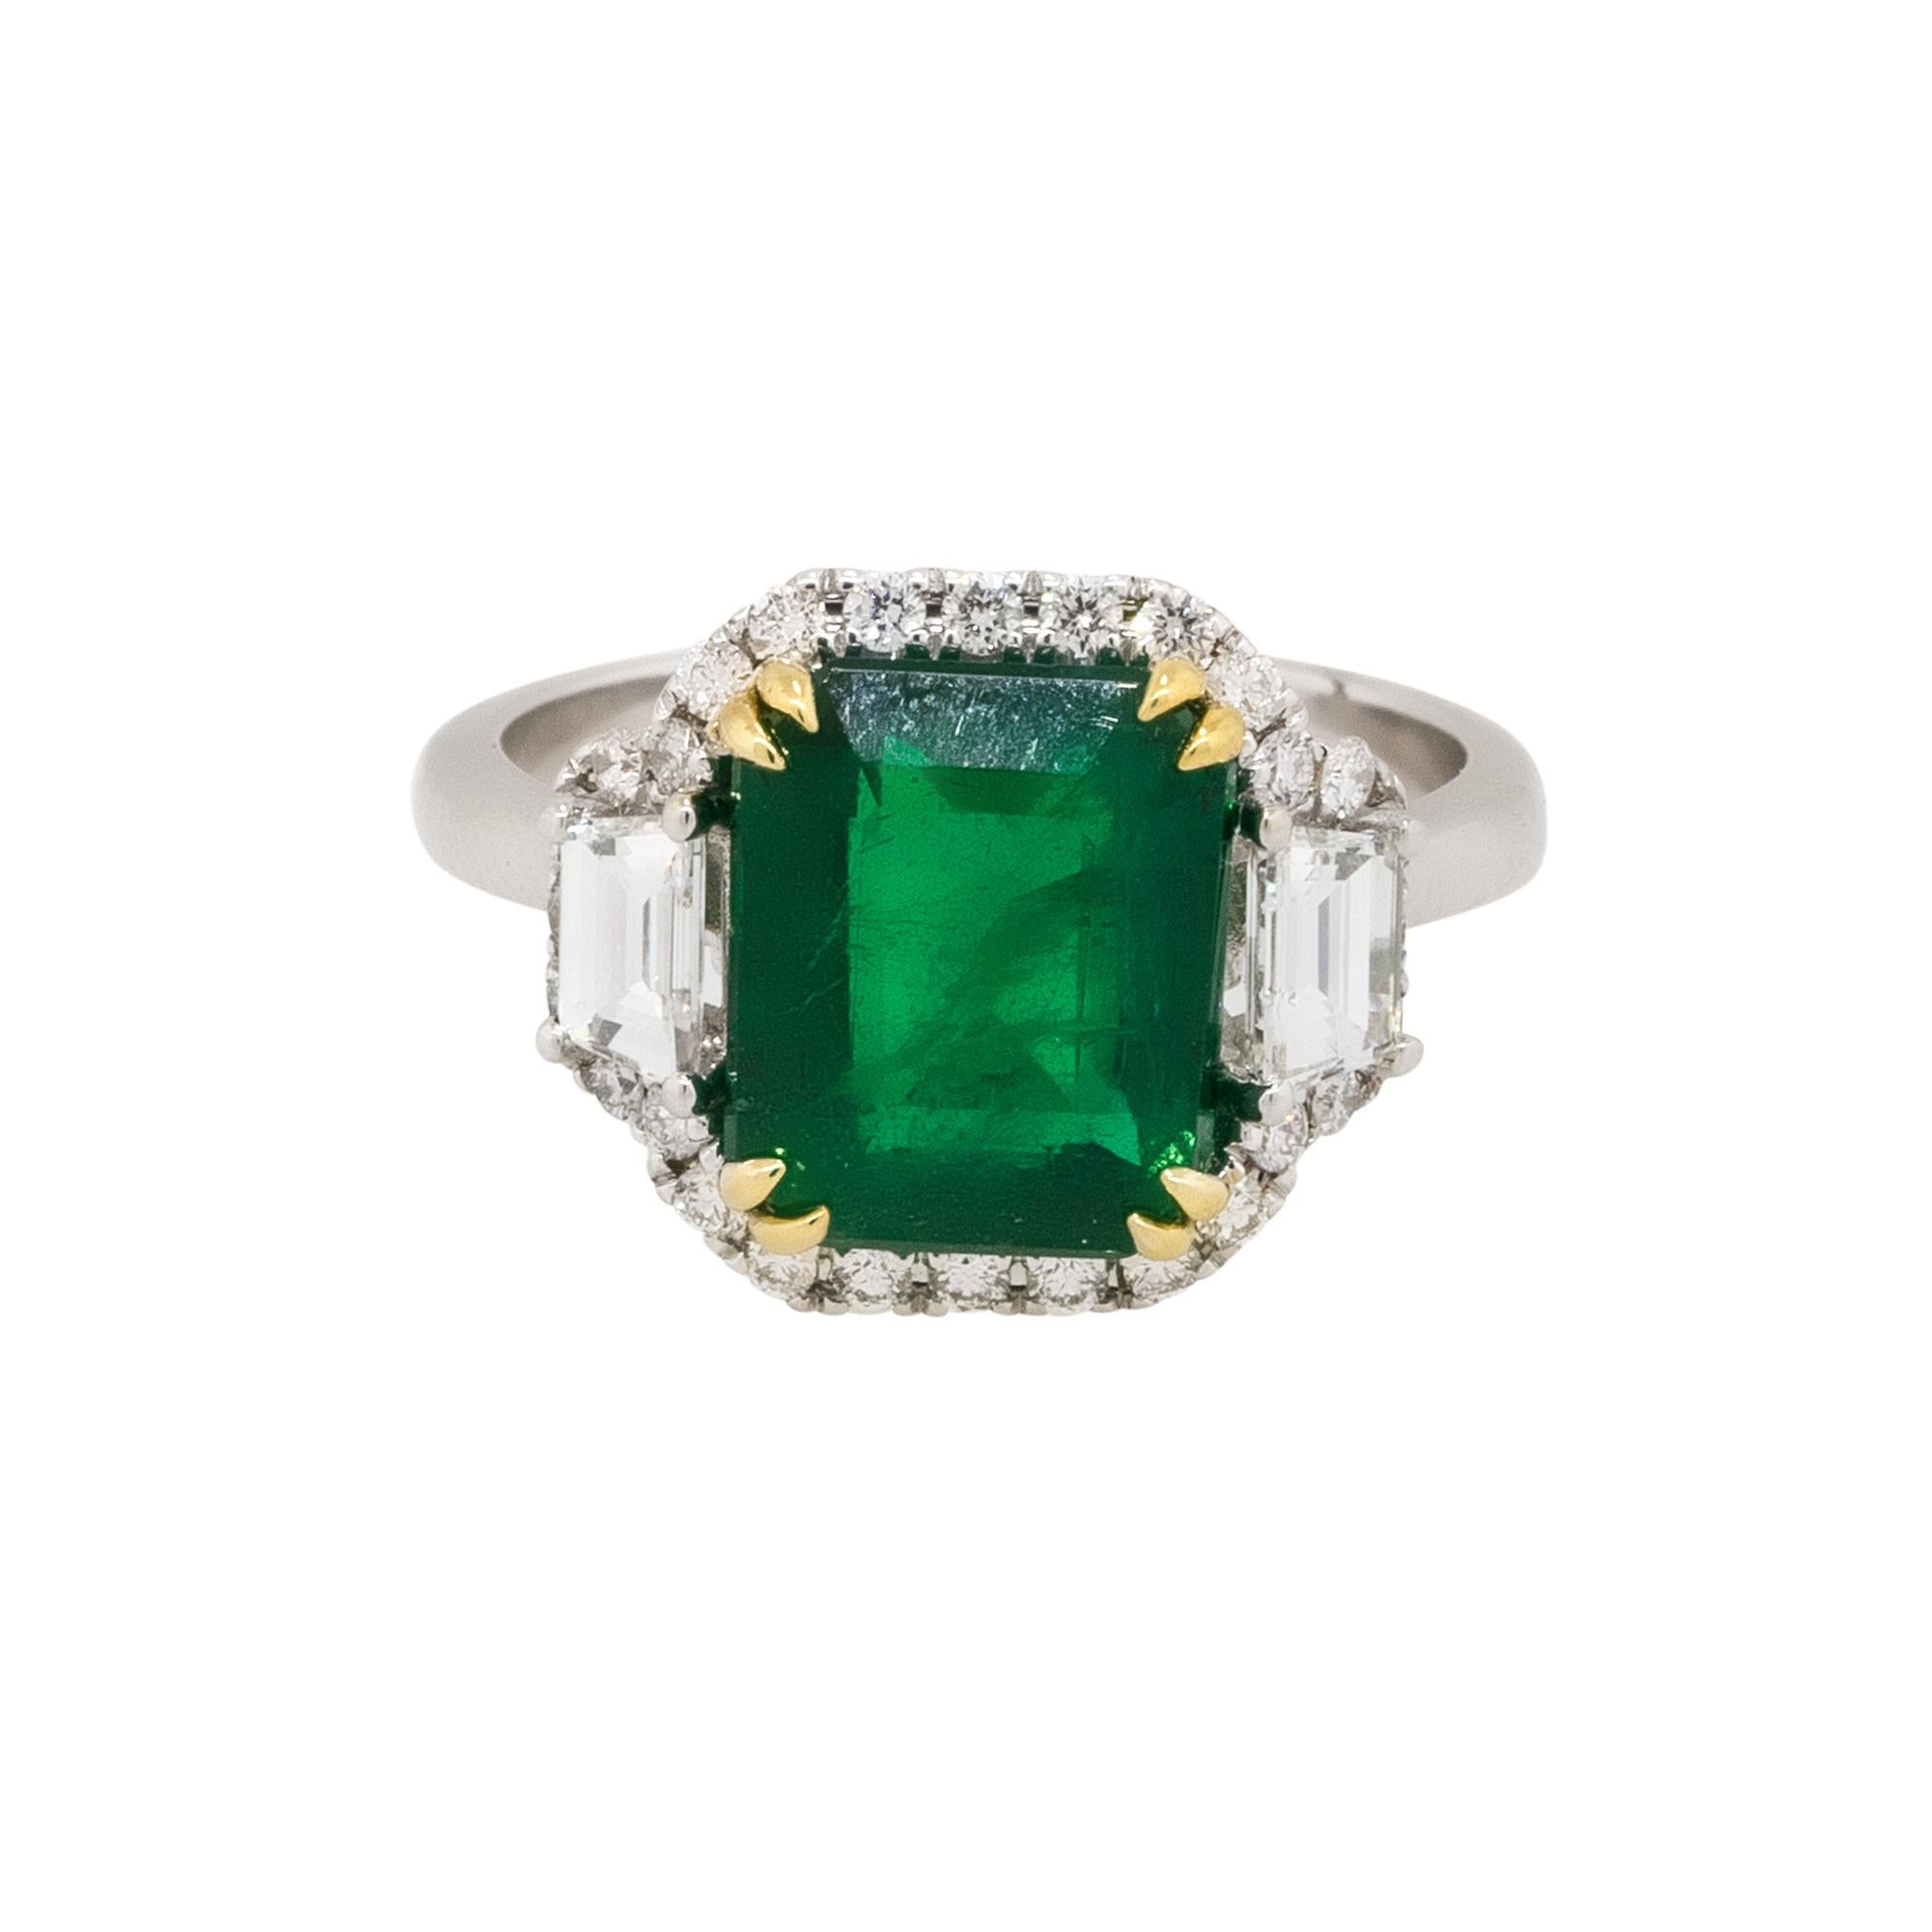 Material: 18k white gold with yellow gold prongs
Diamond Details: Approx. 0.85ctw of trapezoid and round brilliant Diamonds. Diamonds are G/H in color and VS in clarity
Gemstone Details: Approx. 4.11ctw Emerald gemstone center
Ring Size: 7
Total